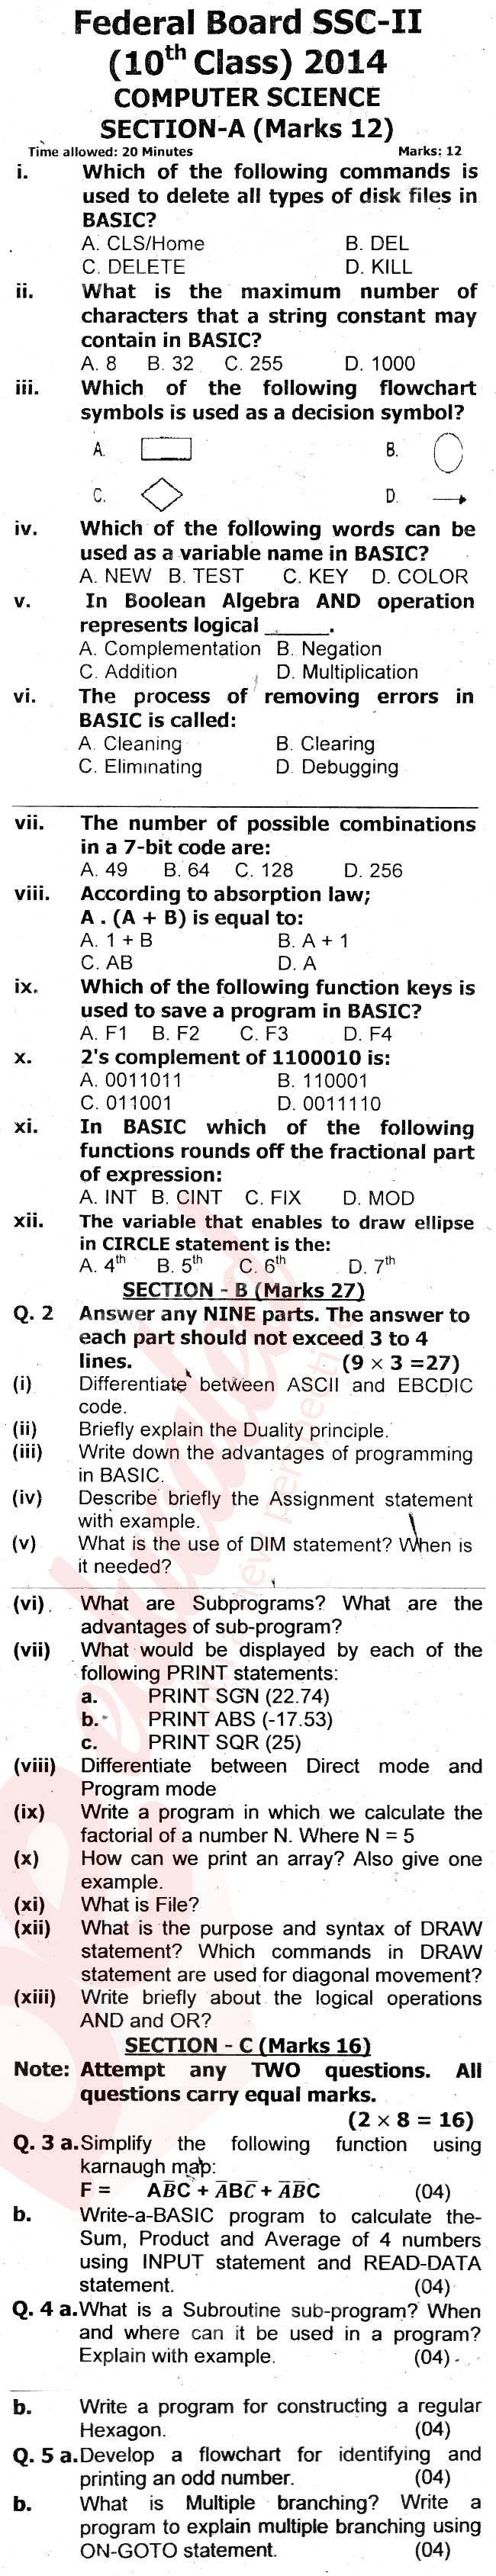 Computer Science 10th English Medium Past Paper Group 1 Federal BISE  2014